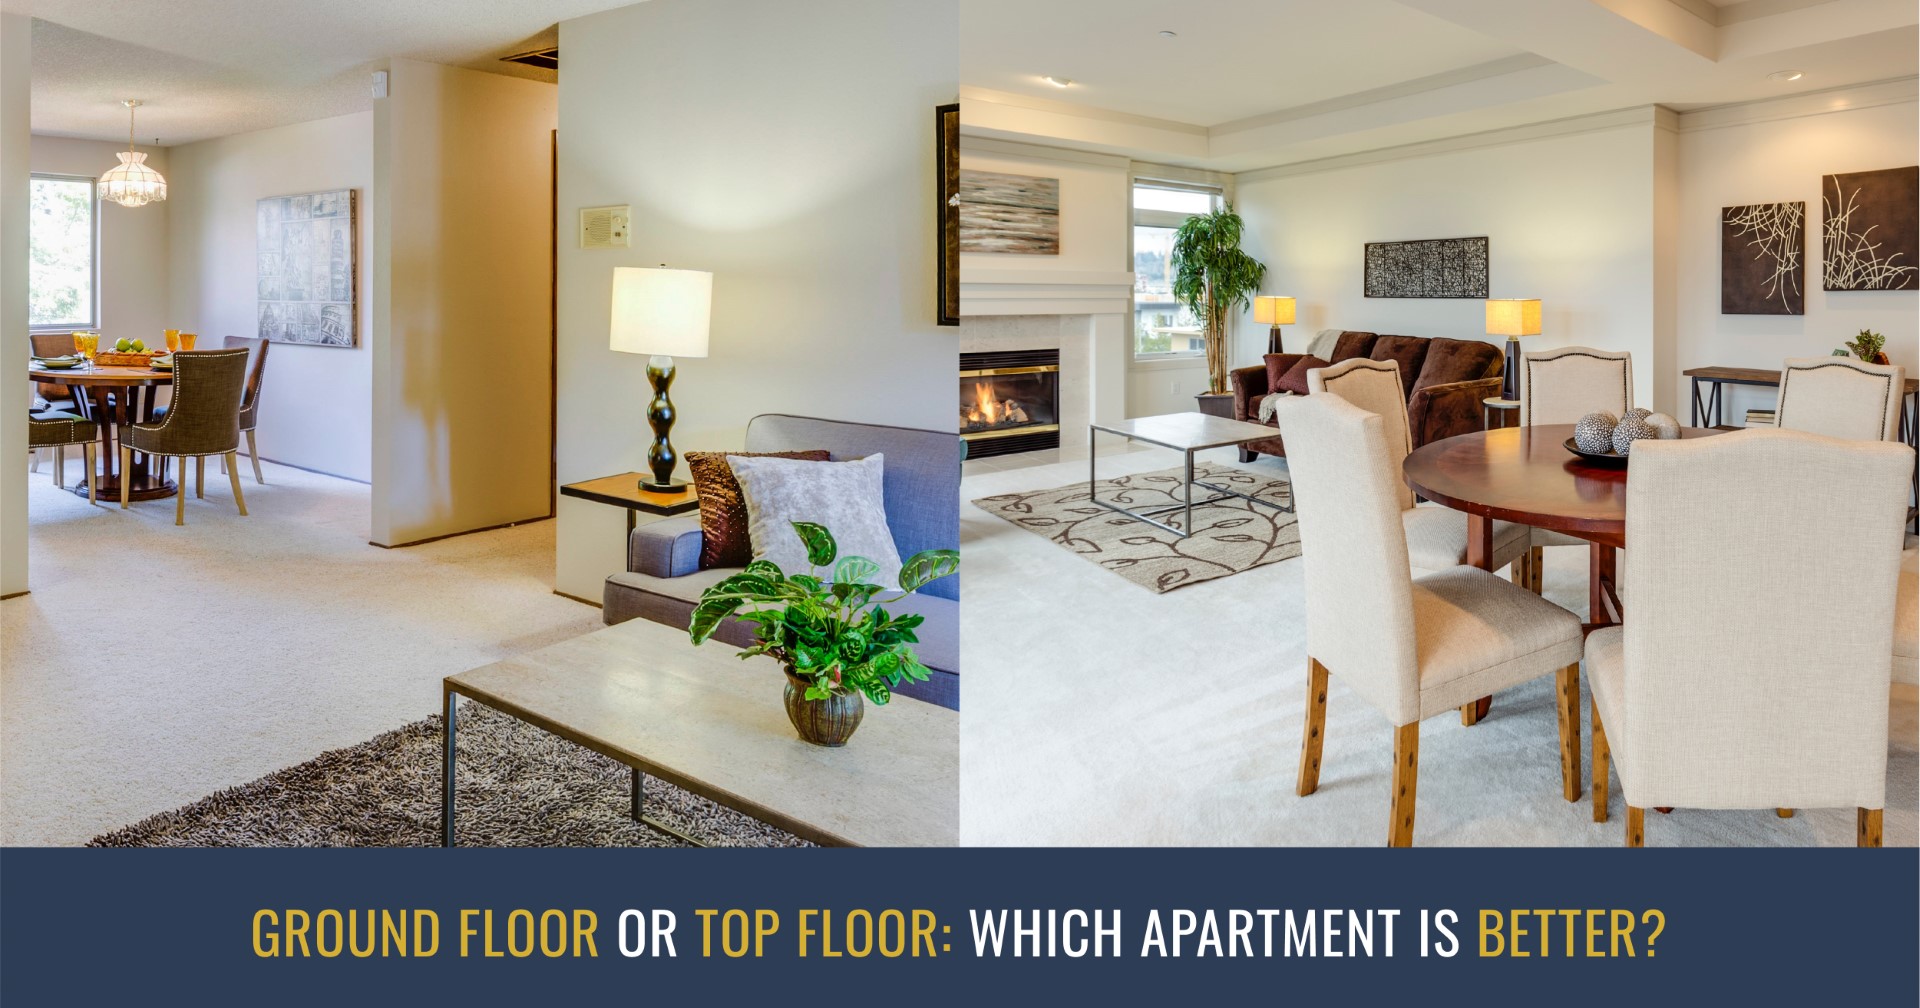 GROUND FLOOR OR TOP FLOOR: WHICH APARTMENT IS BETTER?